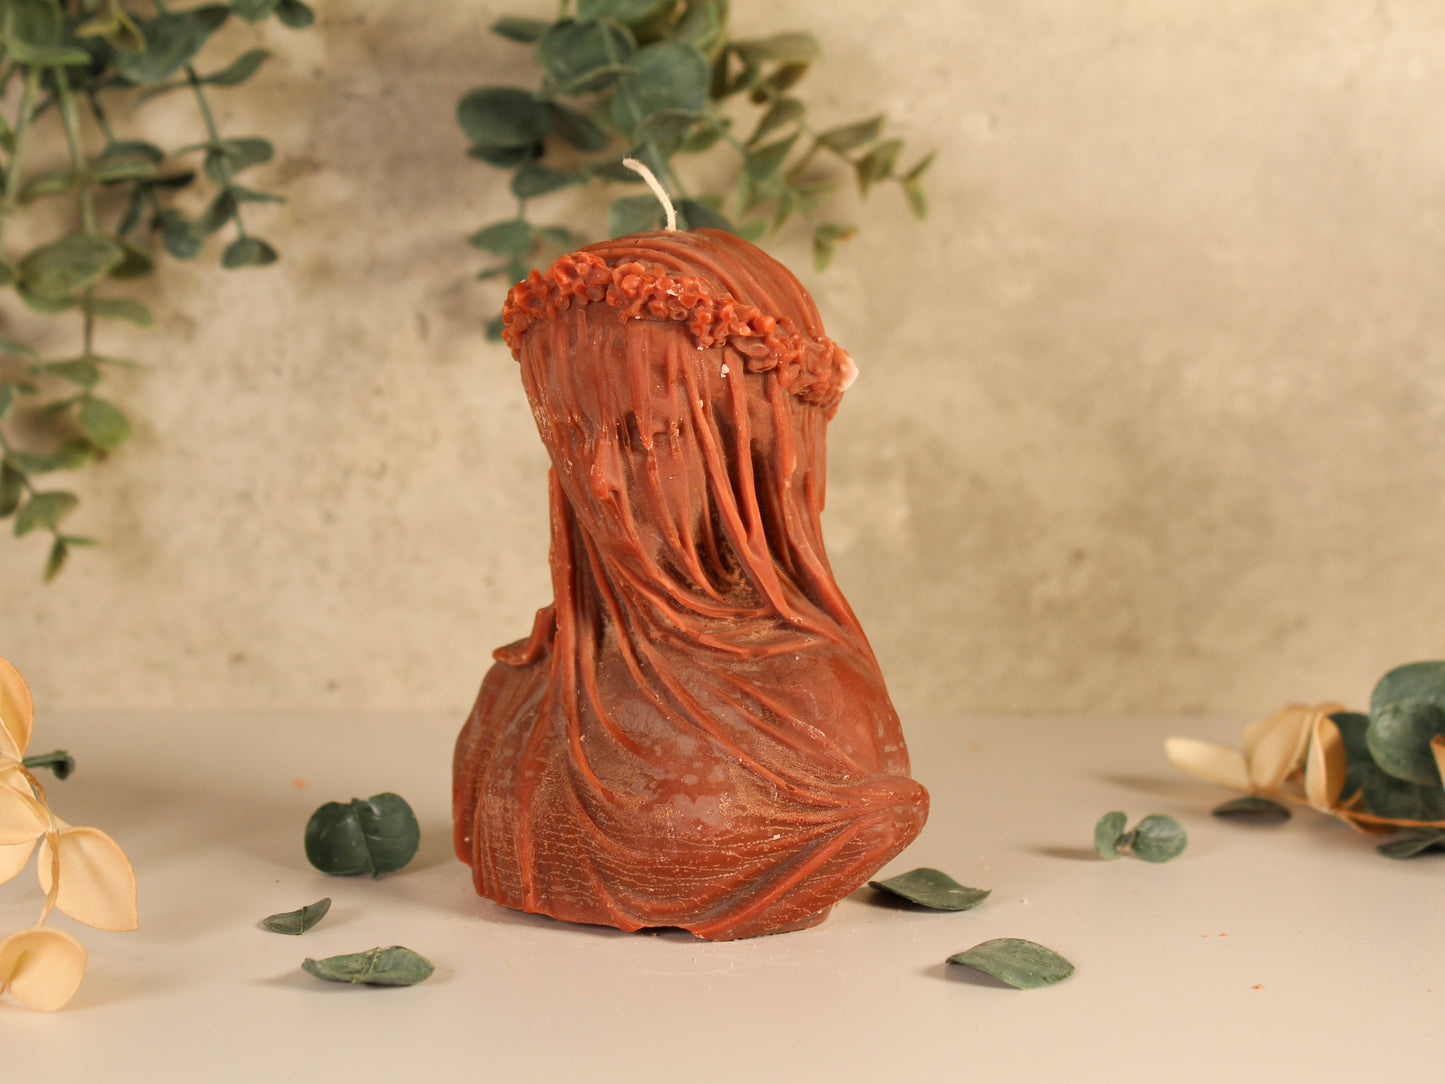 Small Veiled Lady Candle